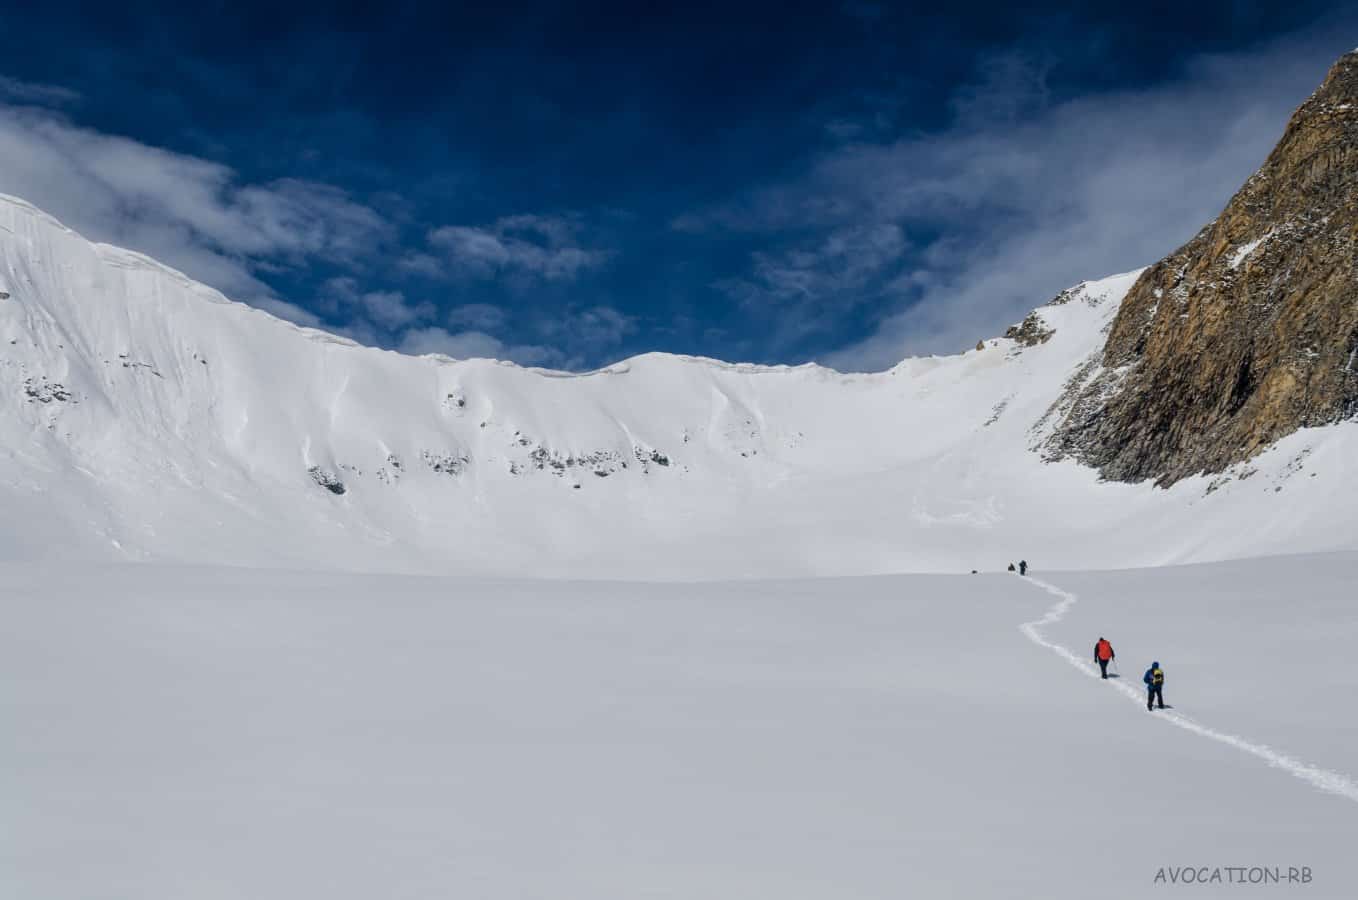 If you see exactly in the middle, there is a cornice. That is gateway to Harsil [Lamkhaga pass trek 2015]